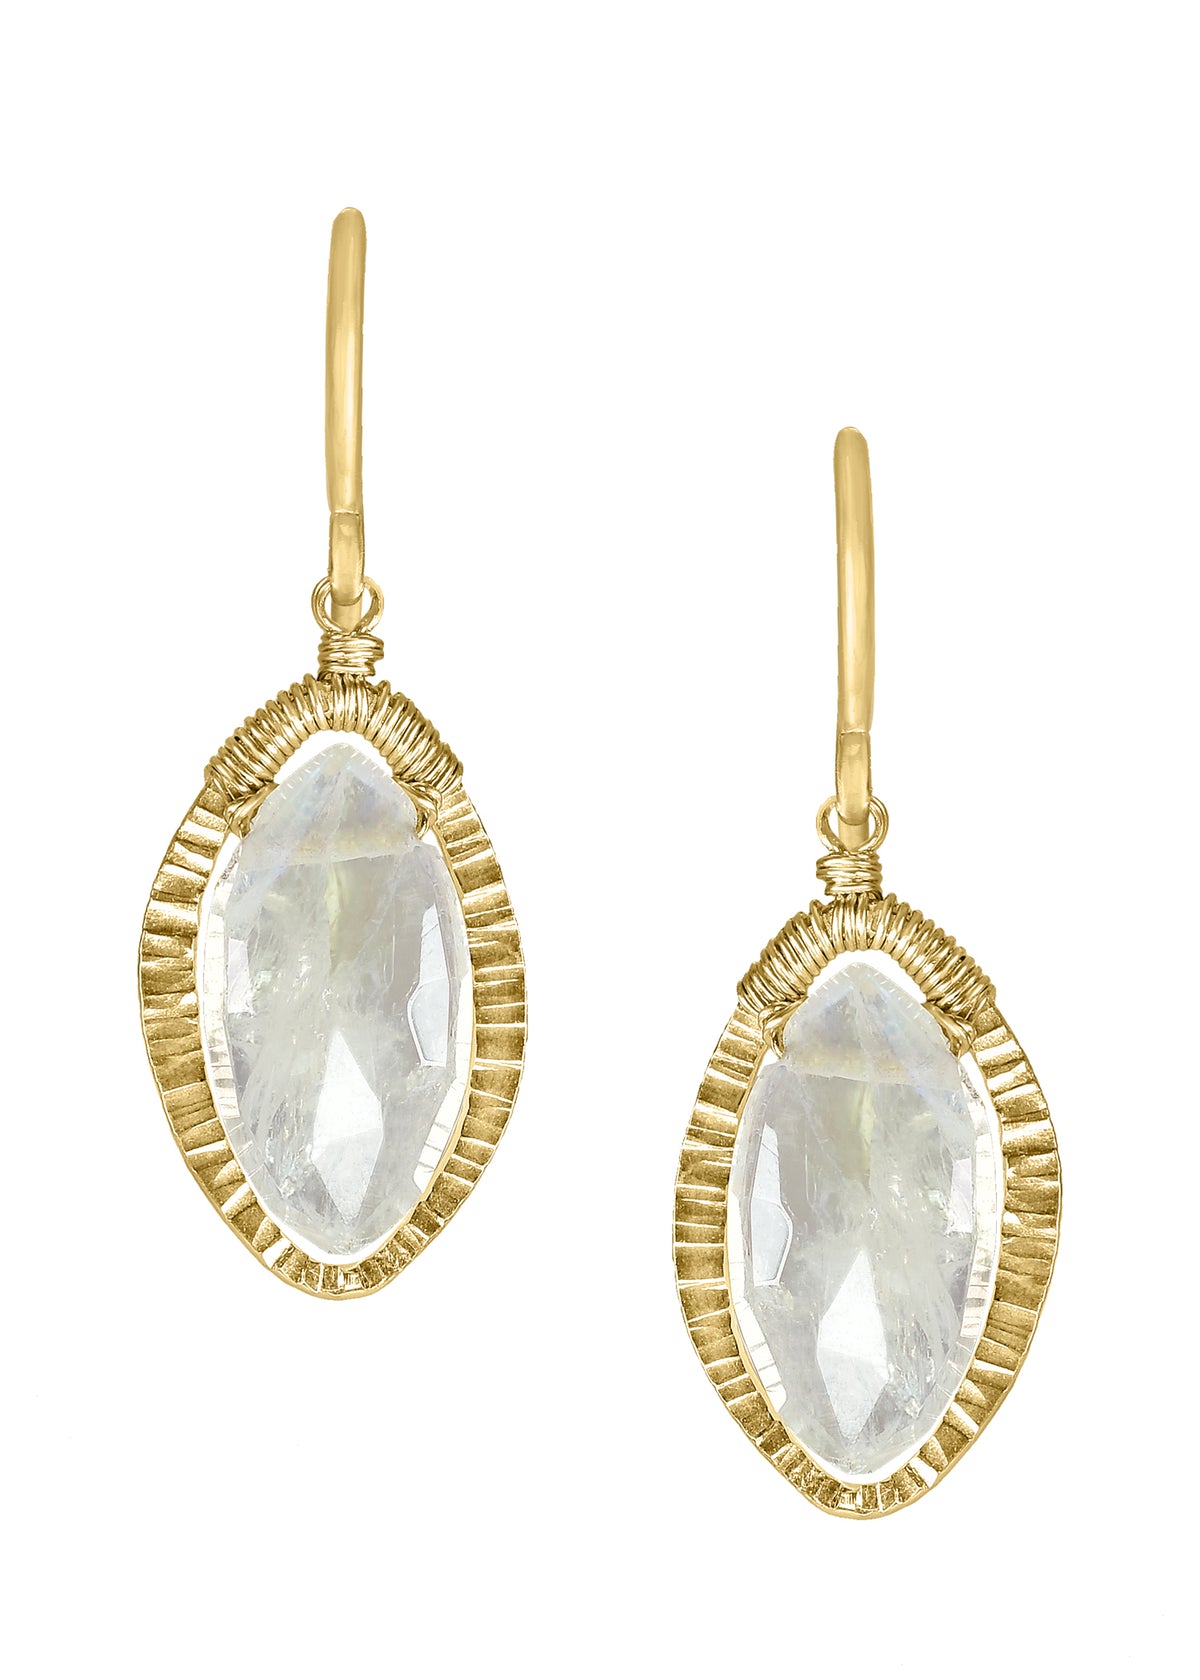 Rainbow moonstone 14k gold fill Earrings measure 1-1/8&quot; in length and 3/8&quot; in width at the widest point Handmade in our Los Angeles studio